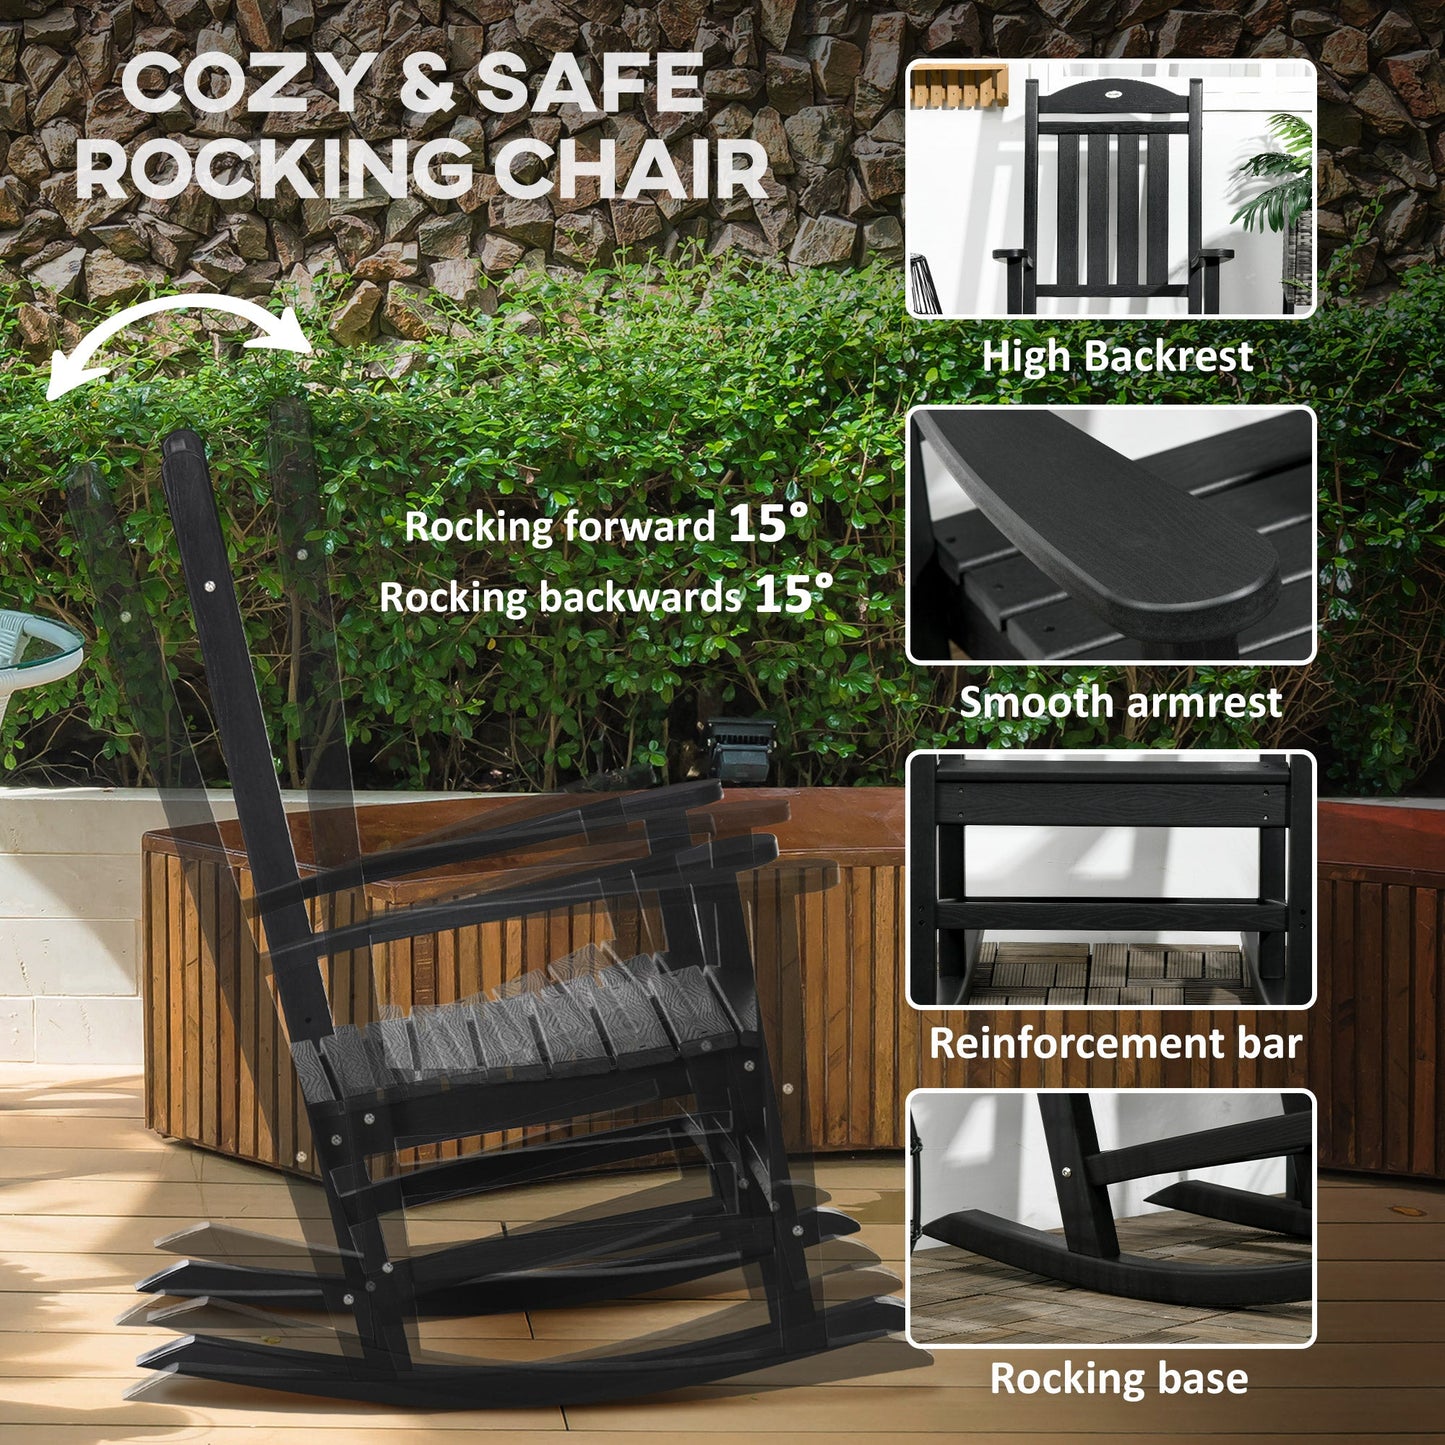 Outdoor and Garden-Outdoor Rocking Chairs, Traditional Porch Rocker, Fade-Resistant HDPE Rocker Chair with Slatted Design for Outdoor & Indoor Use, Black - Outdoor Style Company